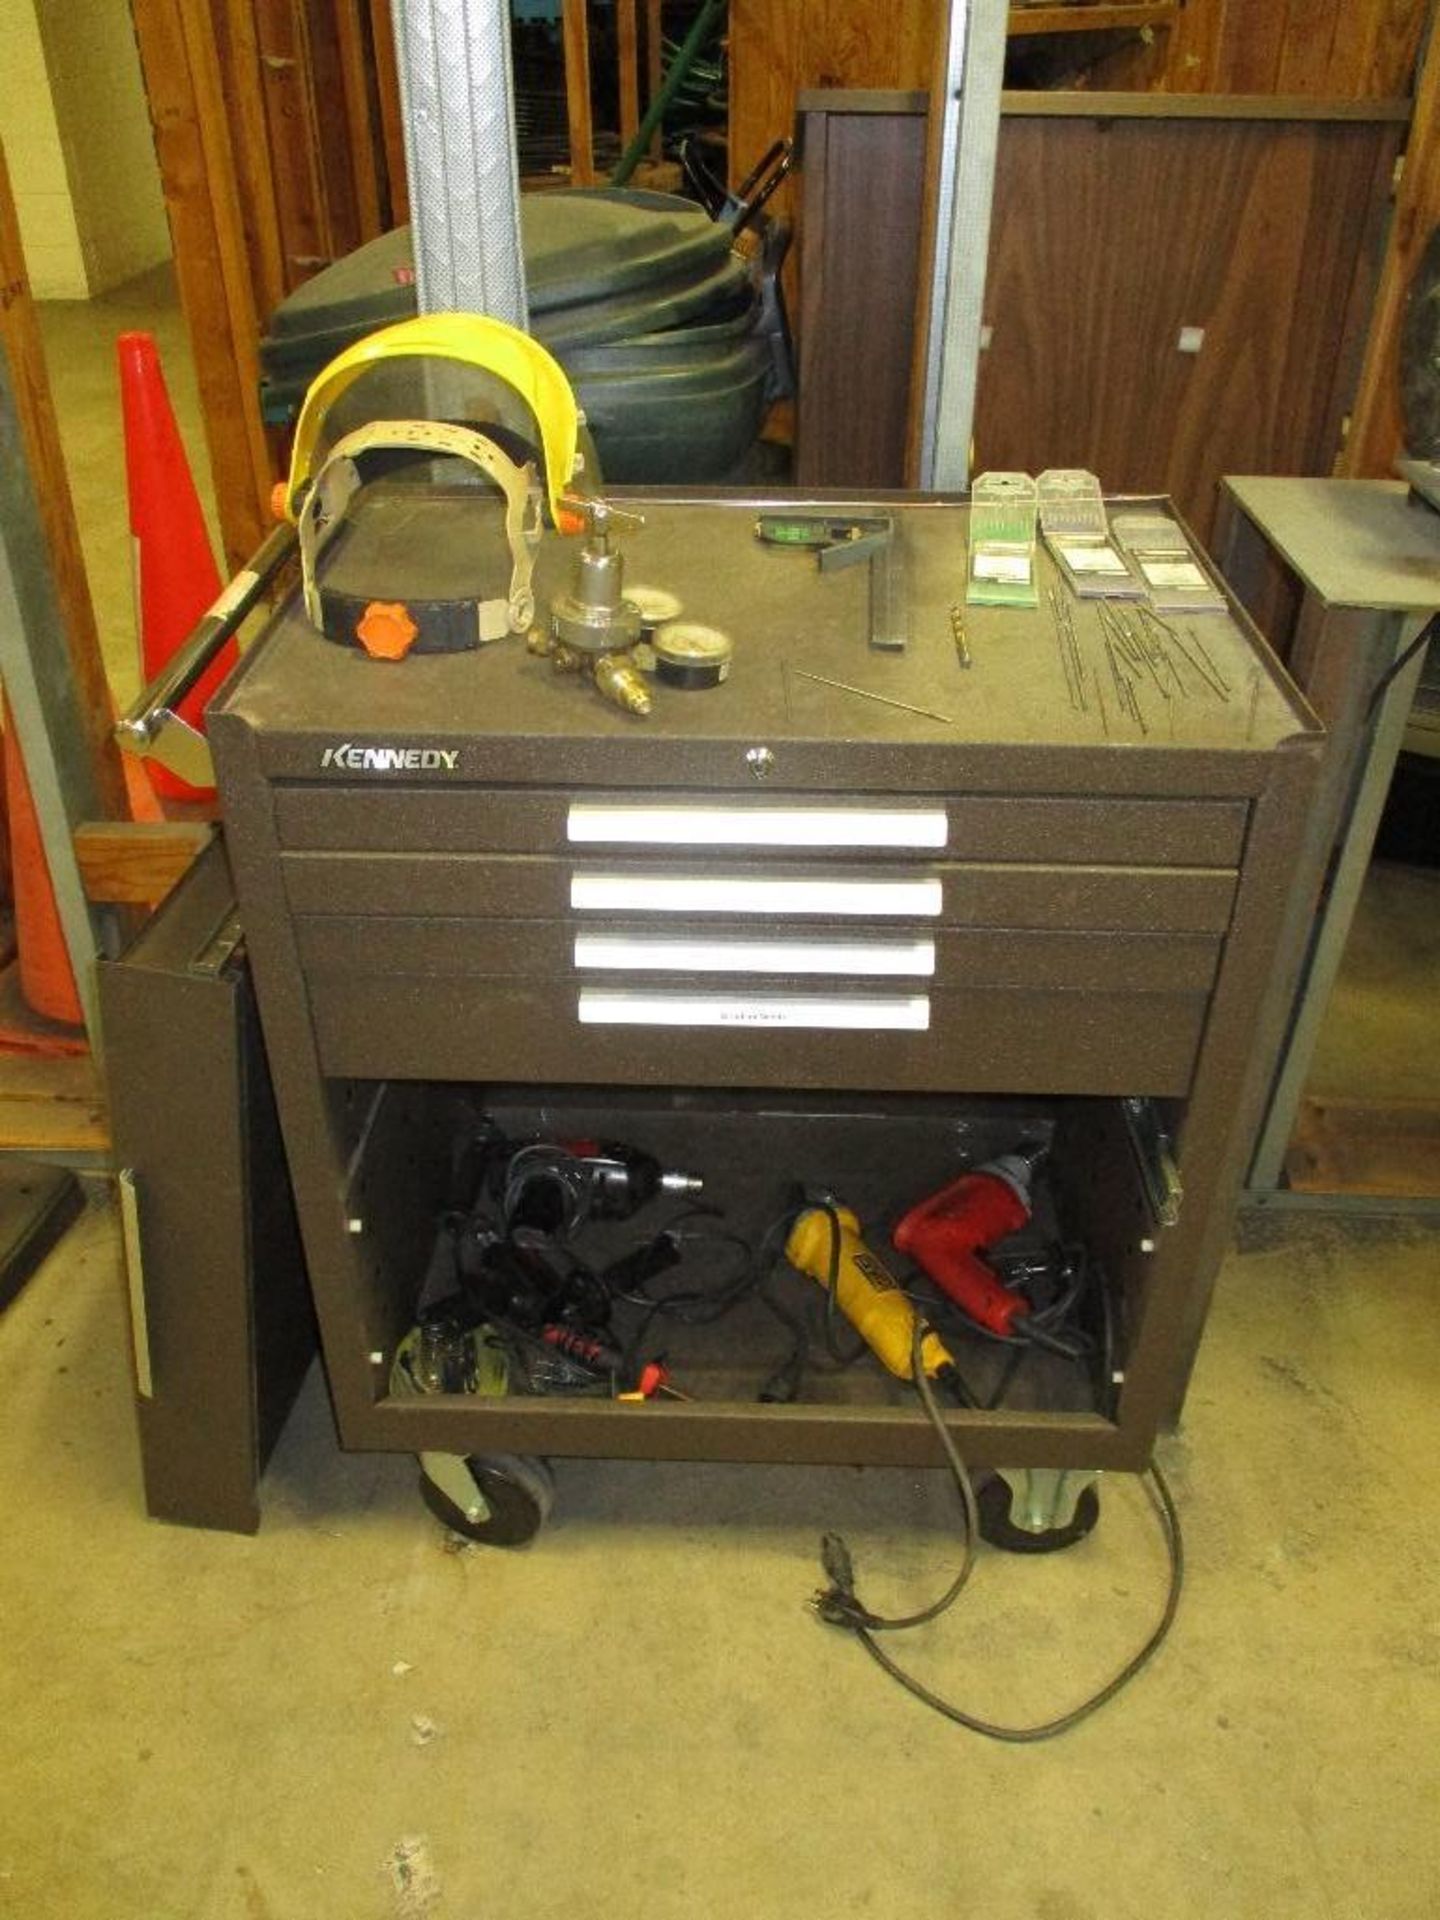 Dayton 6" bench grinder, Kennedy rolling tool box and contents, Shelf with contents - Image 2 of 4